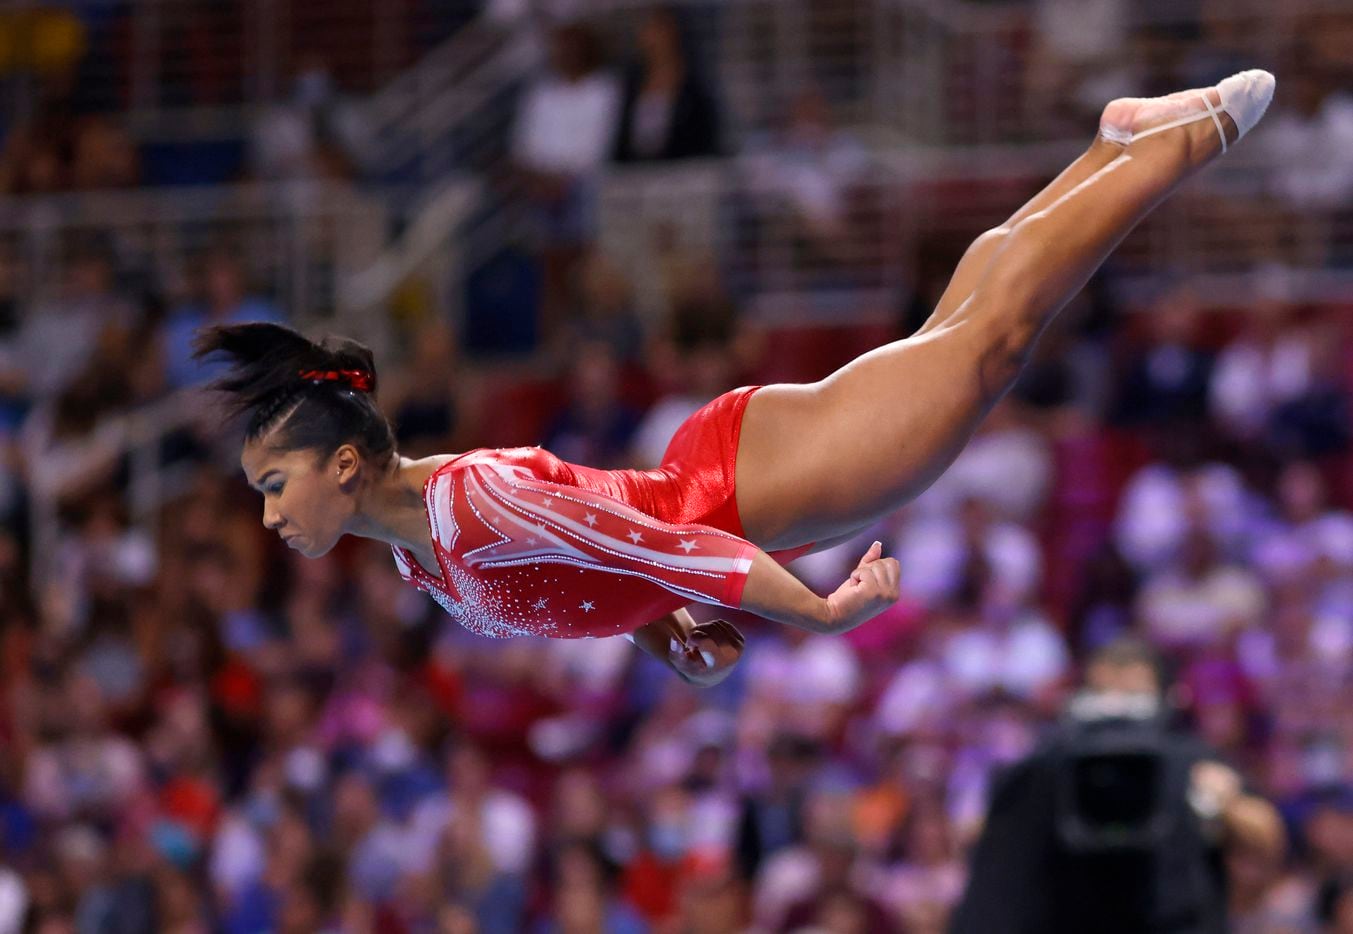 Jordan Chiles during her floor routine during day 2 of the women's 2021 U.S. Olympic Trials...